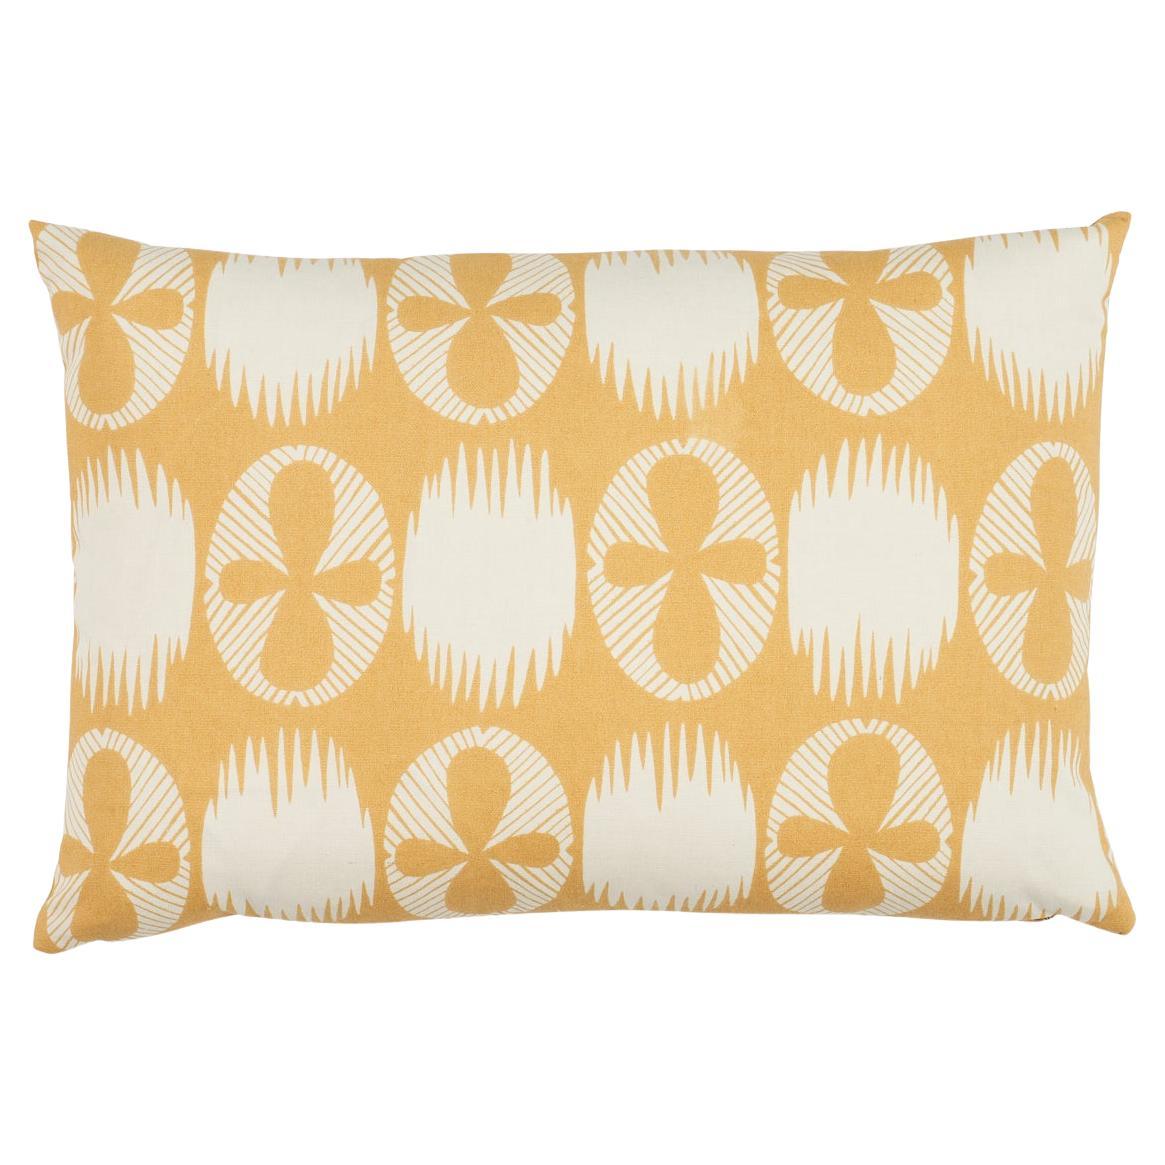 Lunaria Pillow in Ochre, 18x12" For Sale